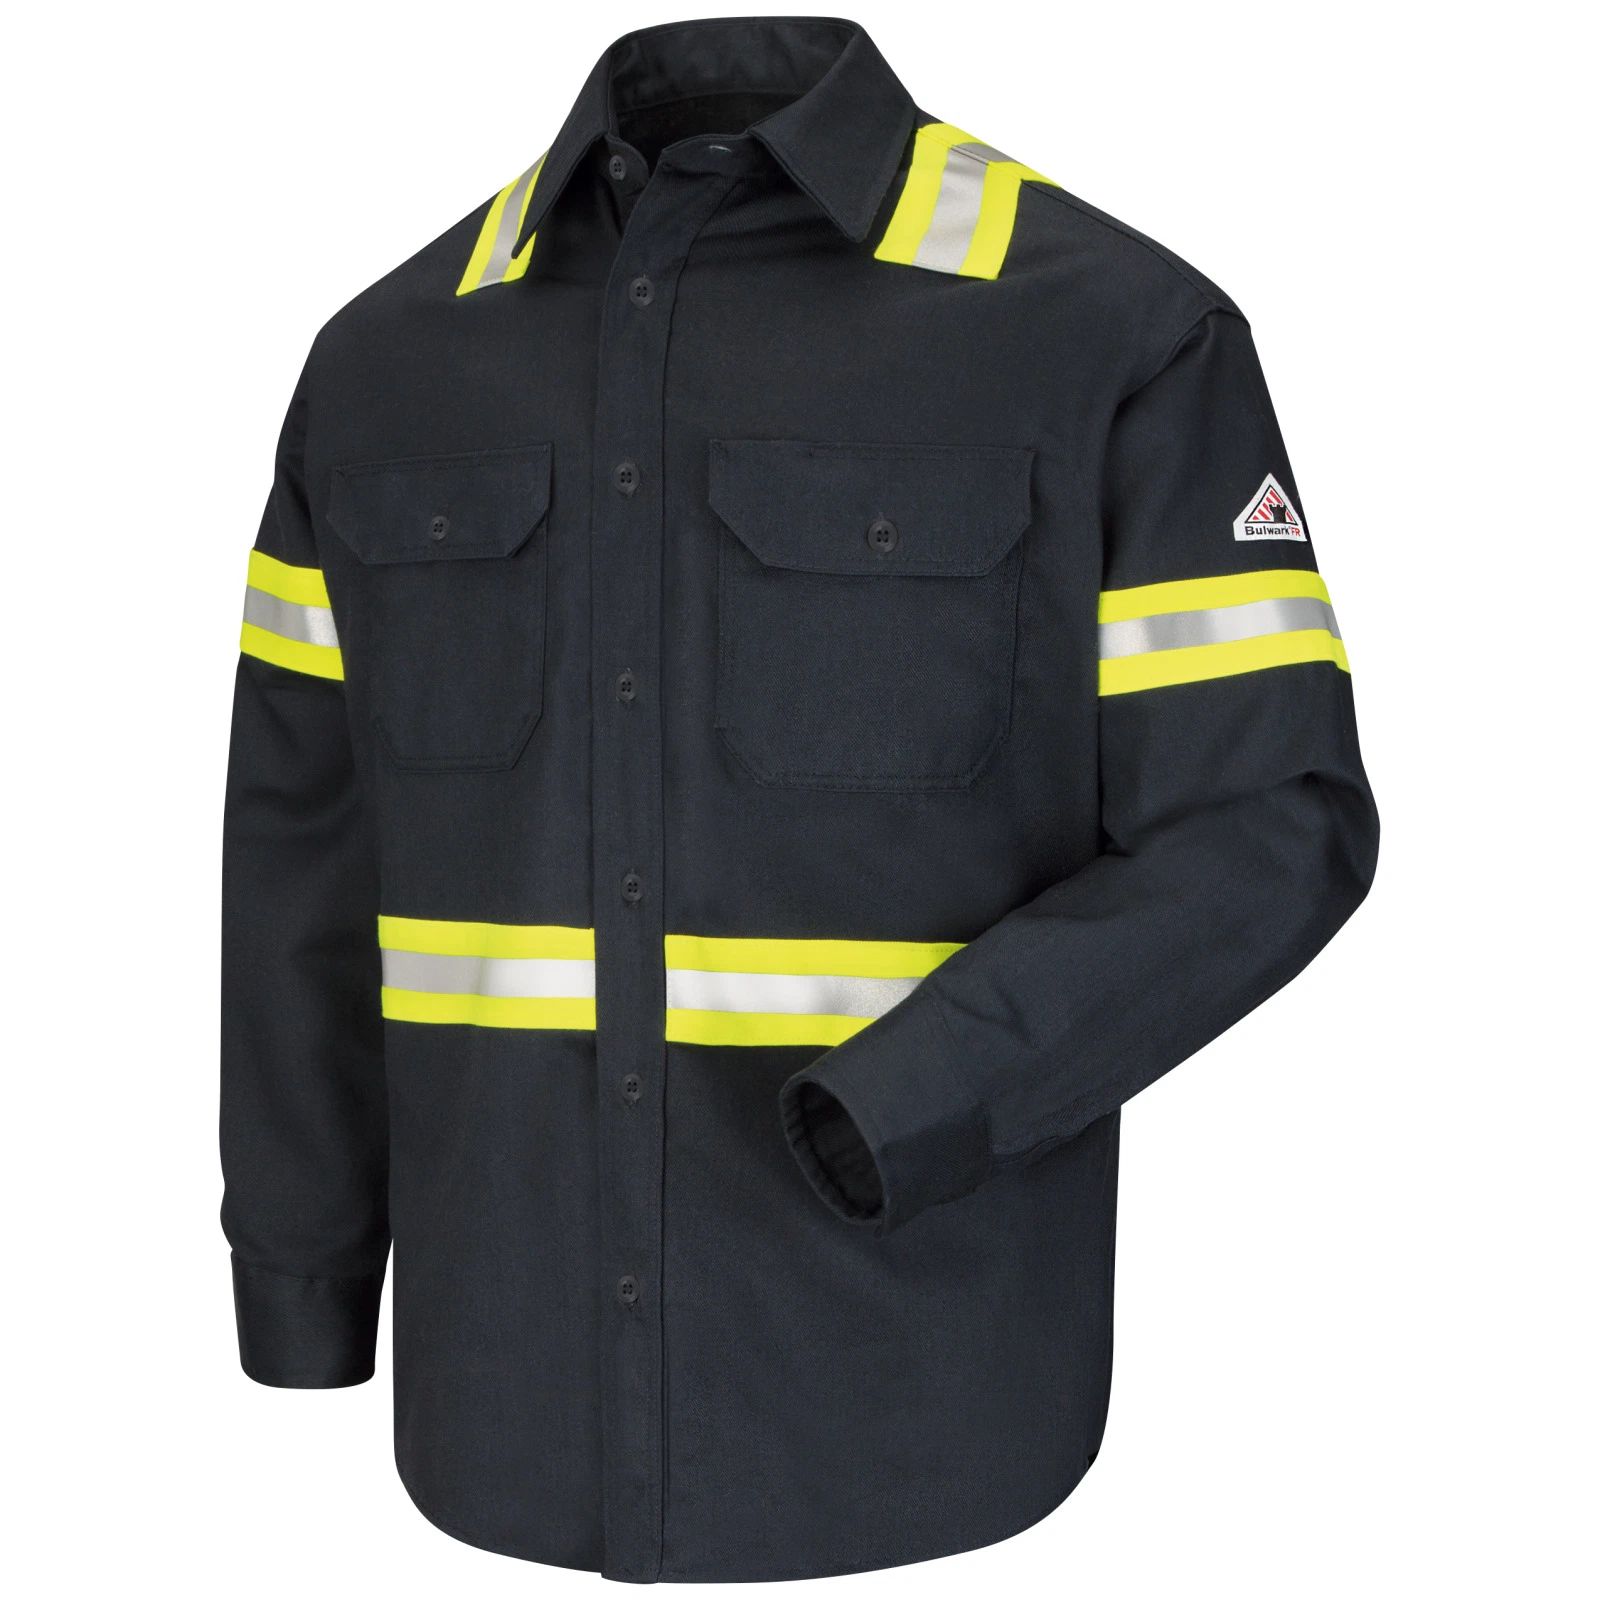 Customized Long-Sleeved High-Visibility Flame Resistant Safety Workwear Shirt